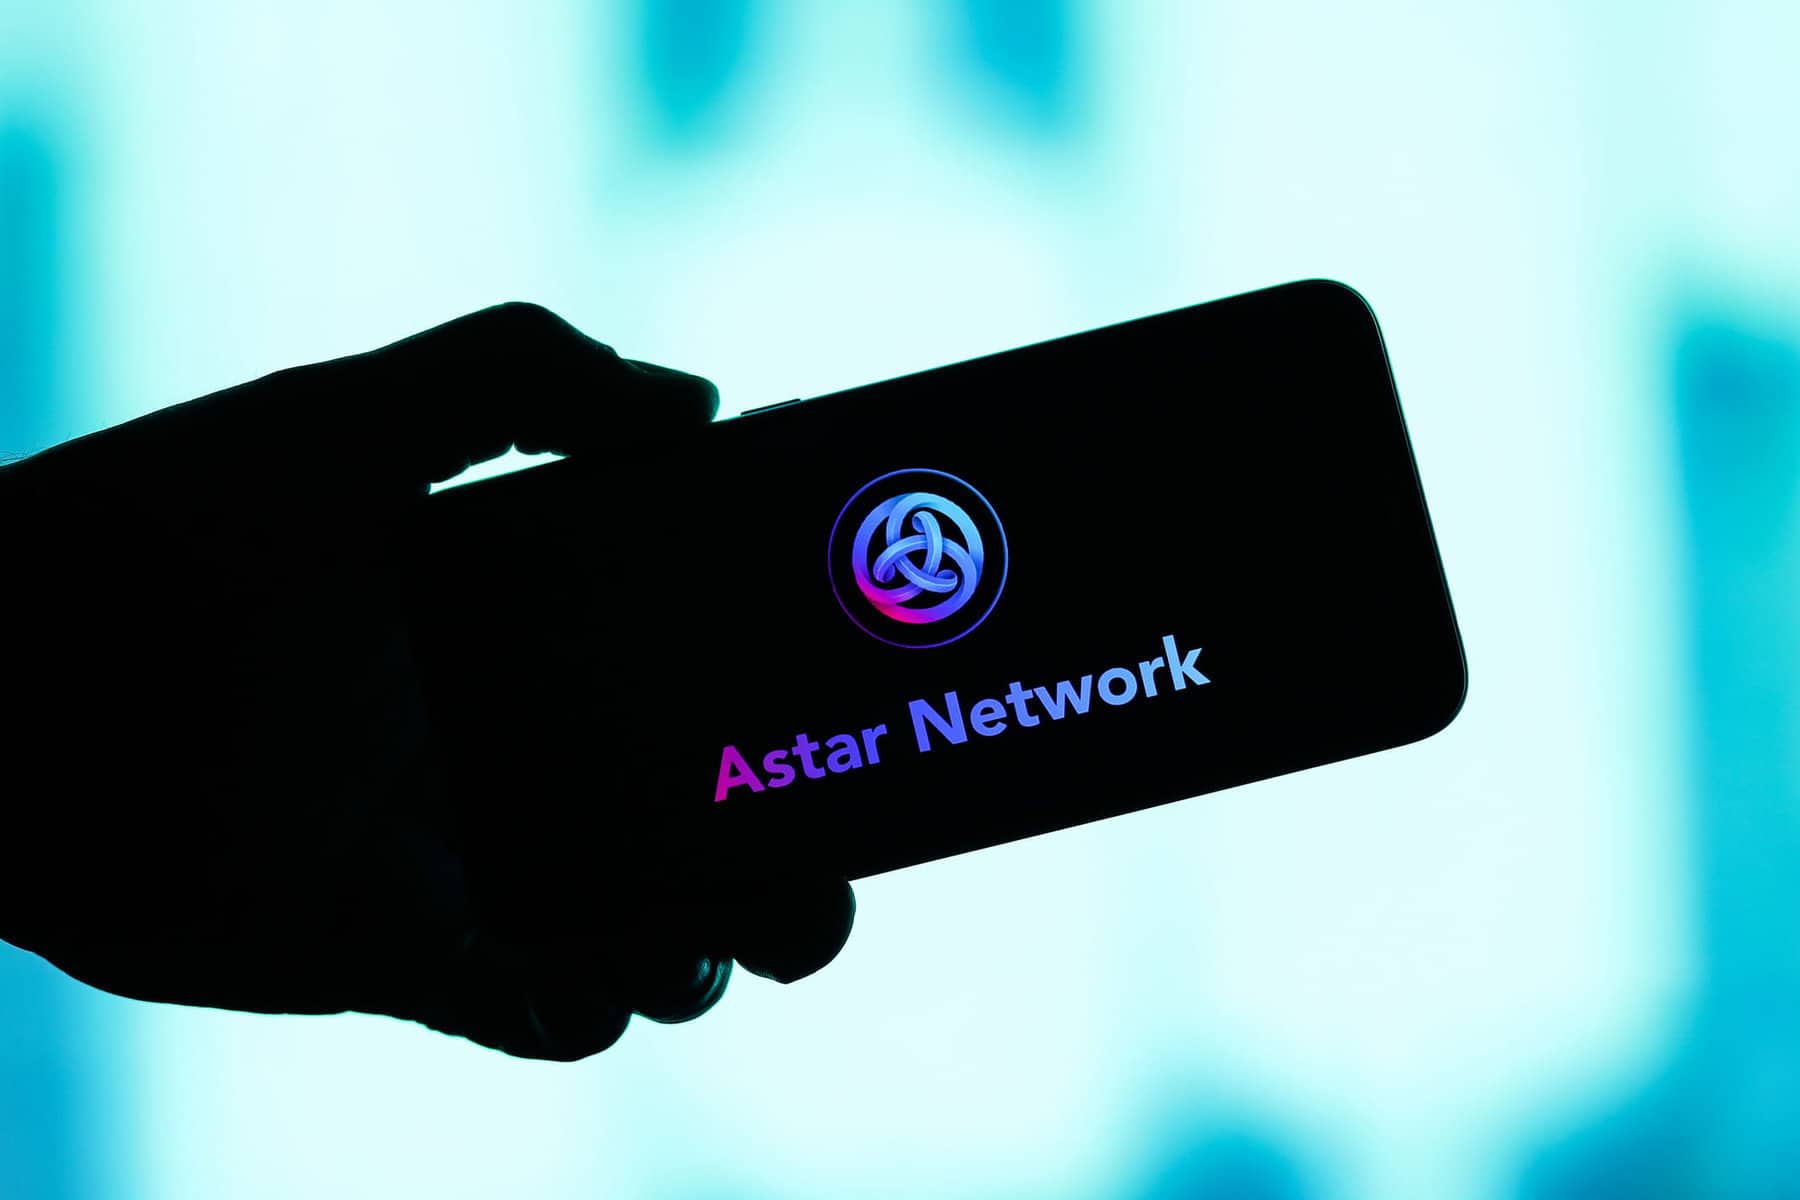 Features of Astar Network